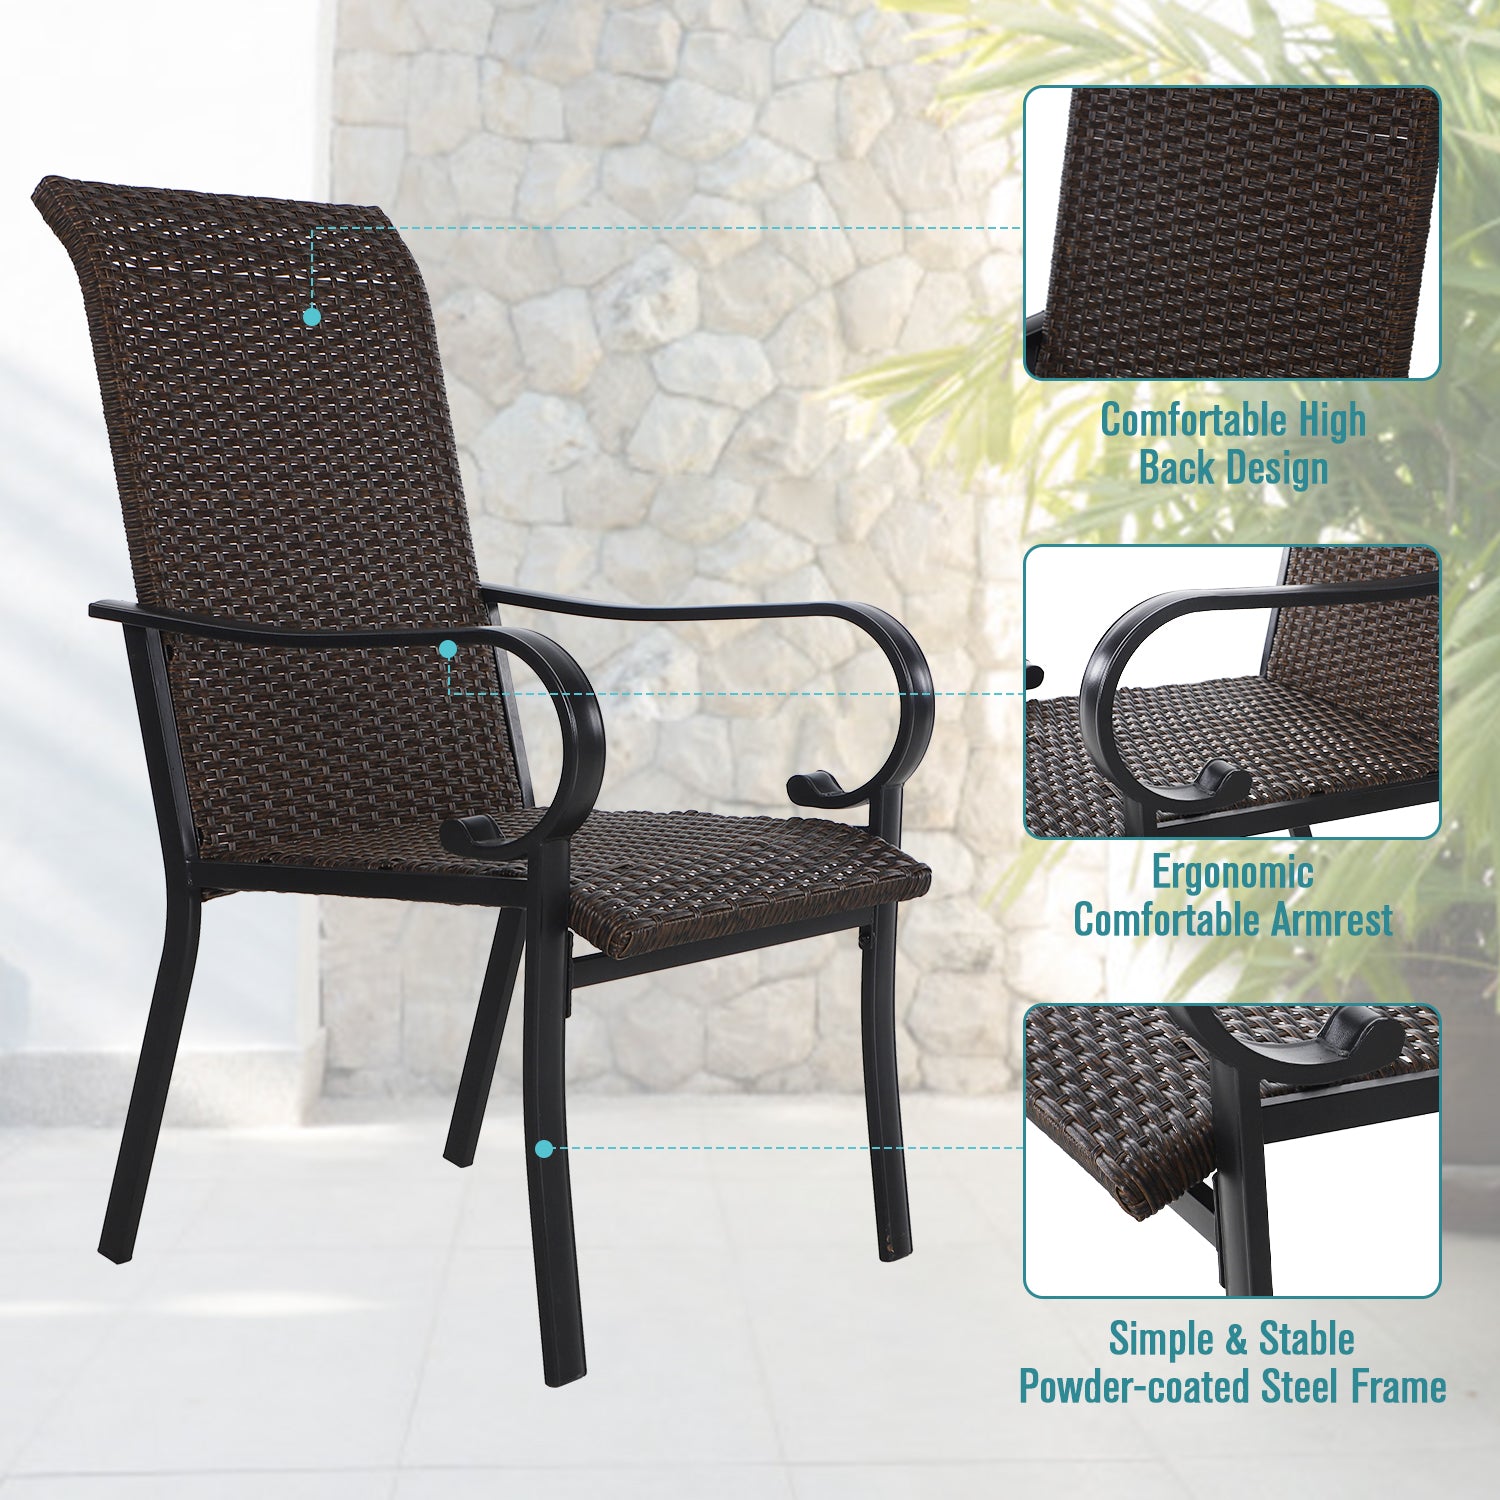 PHI VILLA 7-Piece Patio Dining Set Bowed-bar Table & High-back Rattan Chairs